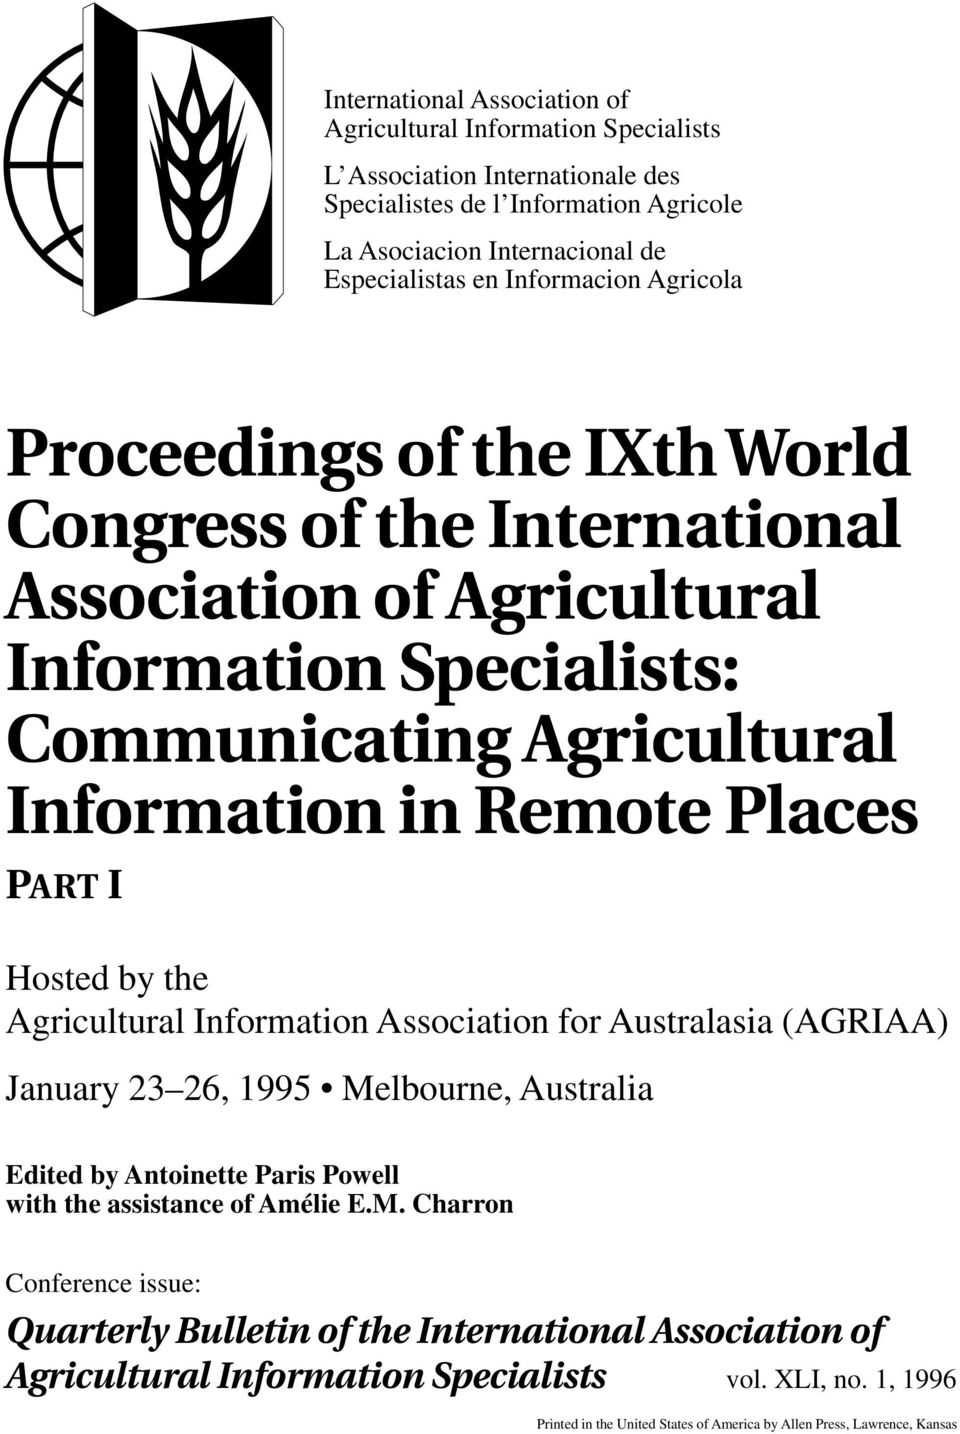 I Hosted by the Agricultural Information Association for Australasia (AGRIAA) January 23 26, 1995 Me